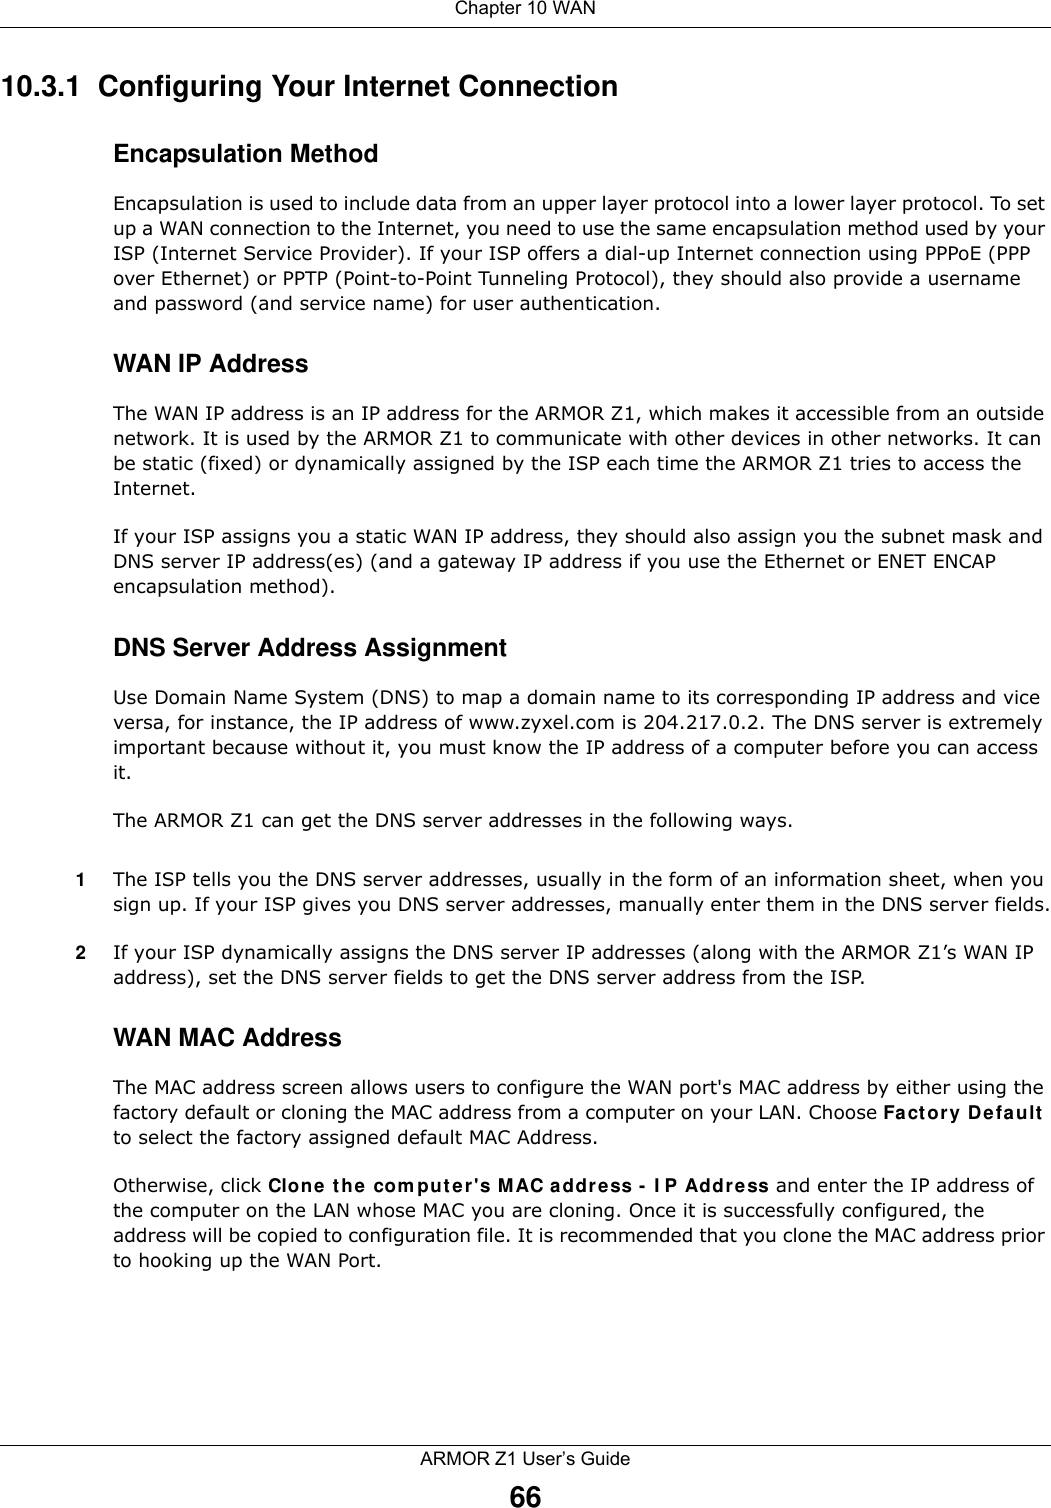 Chapter 10 WANARMOR Z1 User’s Guide6610.3.1  Configuring Your Internet ConnectionEncapsulation MethodEncapsulation is used to include data from an upper layer protocol into a lower layer protocol. To set up a WAN connection to the Internet, you need to use the same encapsulation method used by your ISP (Internet Service Provider). If your ISP offers a dial-up Internet connection using PPPoE (PPP over Ethernet) or PPTP (Point-to-Point Tunneling Protocol), they should also provide a username and password (and service name) for user authentication.WAN IP AddressThe WAN IP address is an IP address for the ARMOR Z1, which makes it accessible from an outside network. It is used by the ARMOR Z1 to communicate with other devices in other networks. It can be static (fixed) or dynamically assigned by the ISP each time the ARMOR Z1 tries to access the Internet.If your ISP assigns you a static WAN IP address, they should also assign you the subnet mask and DNS server IP address(es) (and a gateway IP address if you use the Ethernet or ENET ENCAP encapsulation method).DNS Server Address AssignmentUse Domain Name System (DNS) to map a domain name to its corresponding IP address and vice versa, for instance, the IP address of www.zyxel.com is 204.217.0.2. The DNS server is extremely important because without it, you must know the IP address of a computer before you can access it. The ARMOR Z1 can get the DNS server addresses in the following ways.1The ISP tells you the DNS server addresses, usually in the form of an information sheet, when you sign up. If your ISP gives you DNS server addresses, manually enter them in the DNS server fields.2If your ISP dynamically assigns the DNS server IP addresses (along with the ARMOR Z1’s WAN IP address), set the DNS server fields to get the DNS server address from the ISP. WAN MAC AddressThe MAC address screen allows users to configure the WAN port&apos;s MAC address by either using the factory default or cloning the MAC address from a computer on your LAN. Choose Factory Default to select the factory assigned default MAC Address.Otherwise, click Clone the computer&apos;s MAC address - IP Address and enter the IP address of the computer on the LAN whose MAC you are cloning. Once it is successfully configured, the address will be copied to configuration file. It is recommended that you clone the MAC address prior to hooking up the WAN Port.